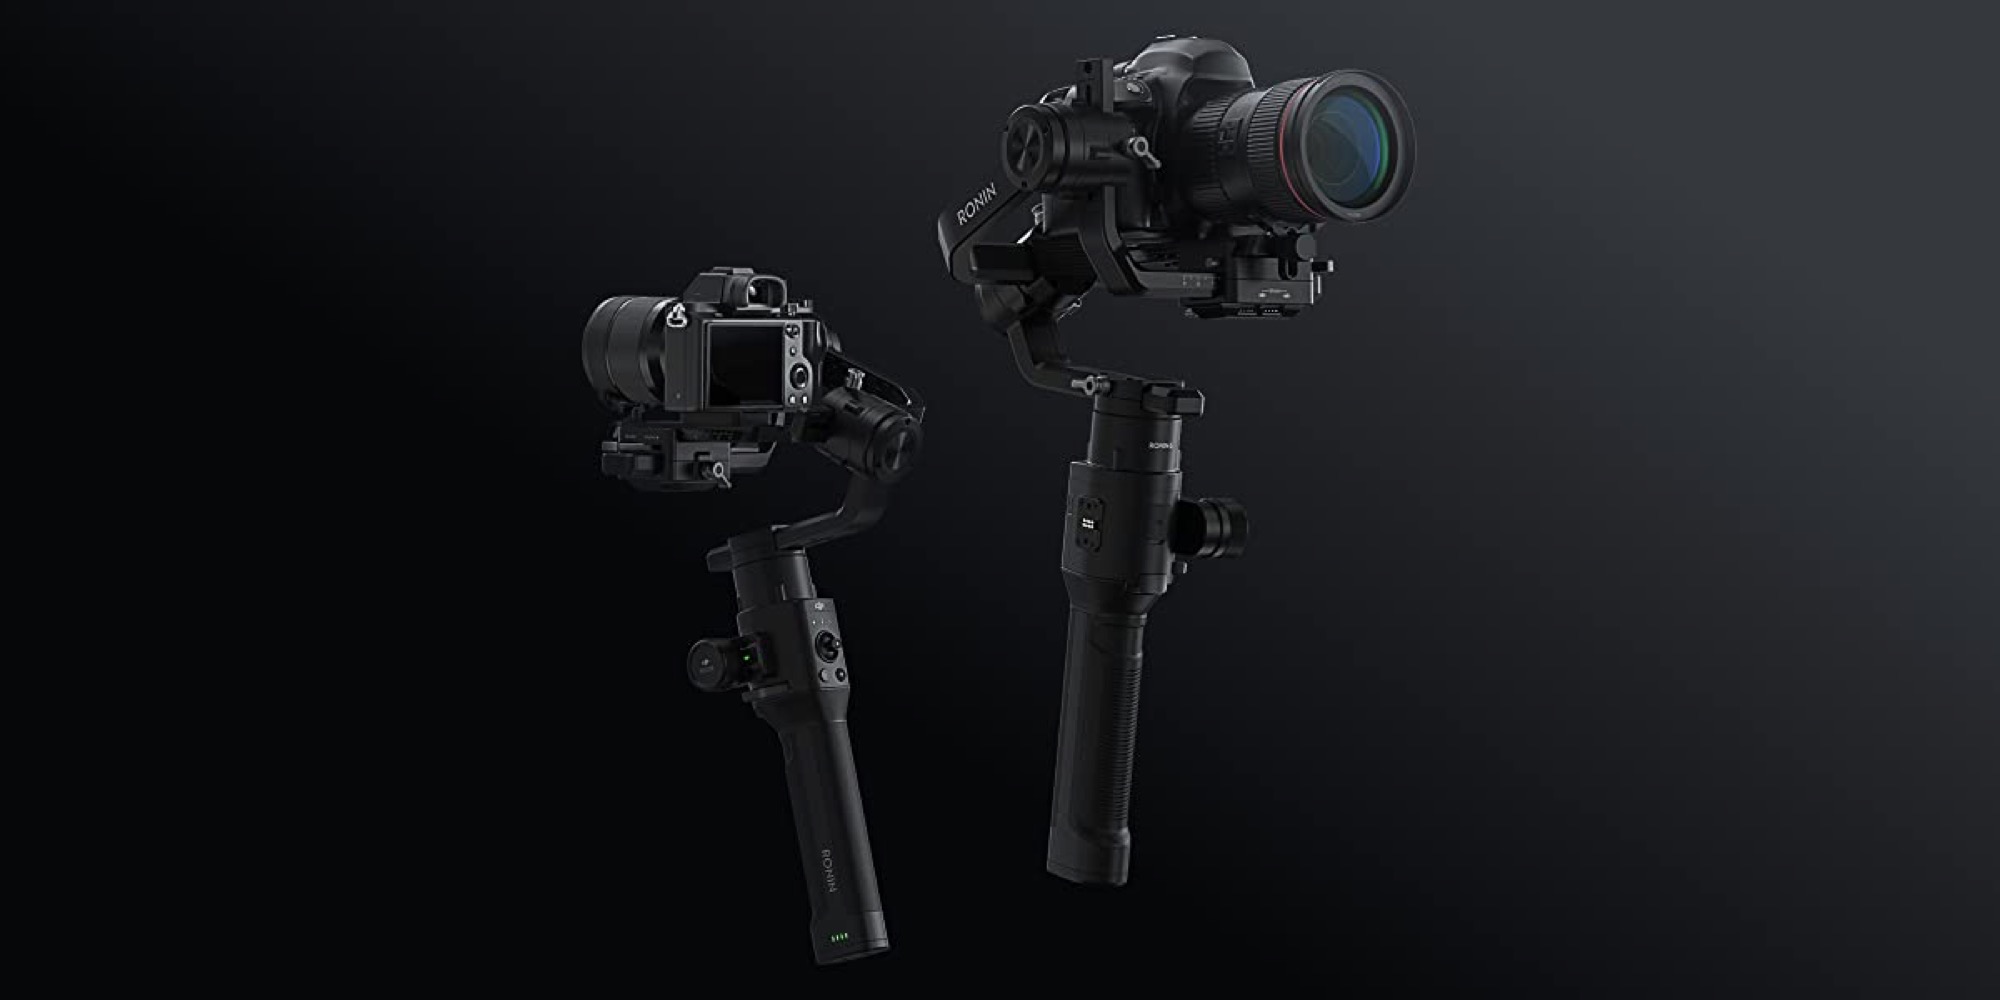 Ratchet up captures with Ronin-S Gimbal while $190 at Amazon